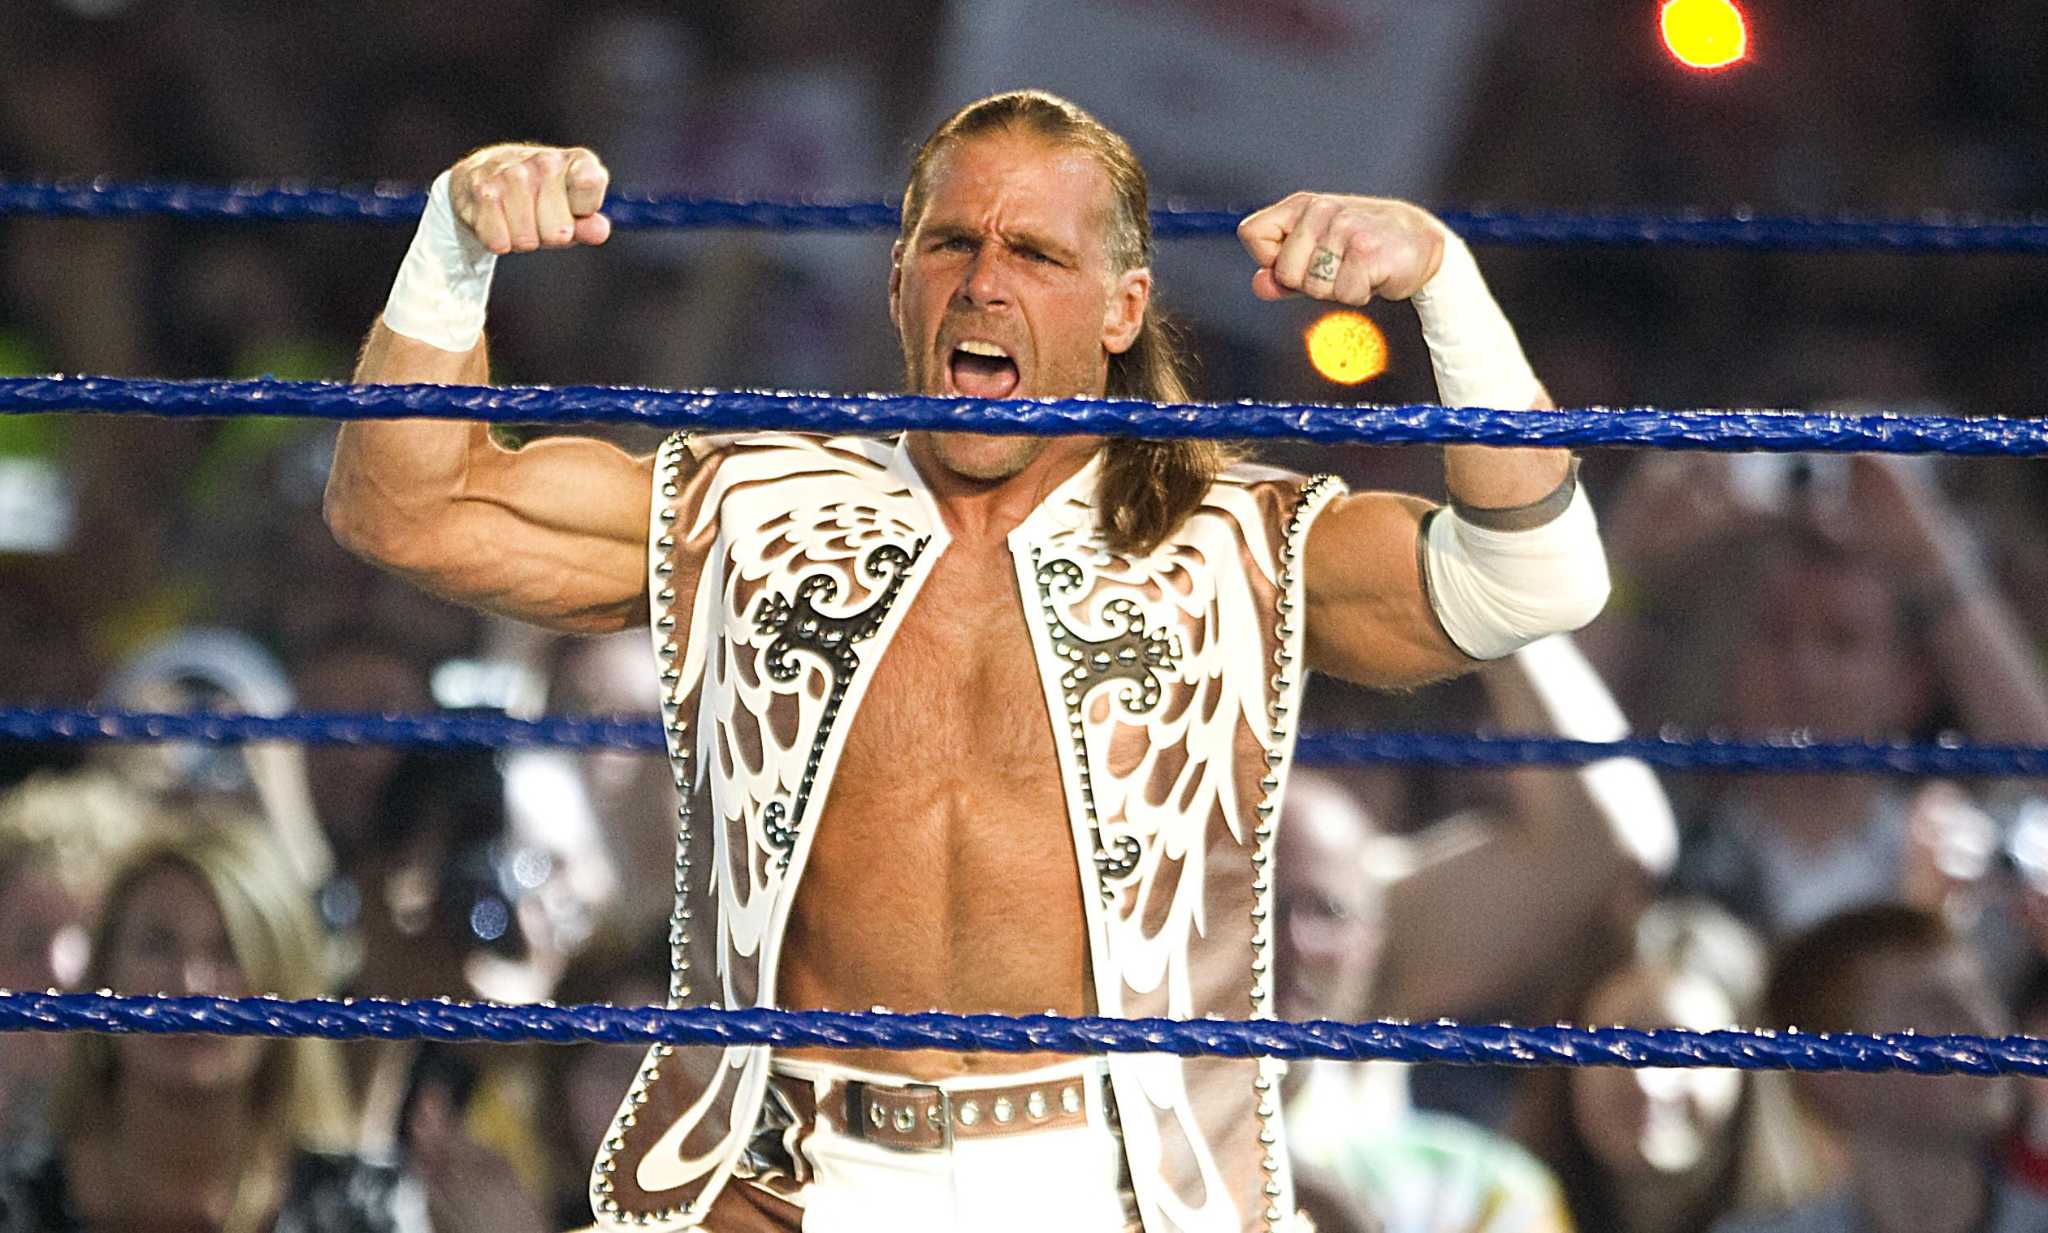 5 Things Triple H Does Better Than Shawn Michaels (& 5 HBK Is Best At)